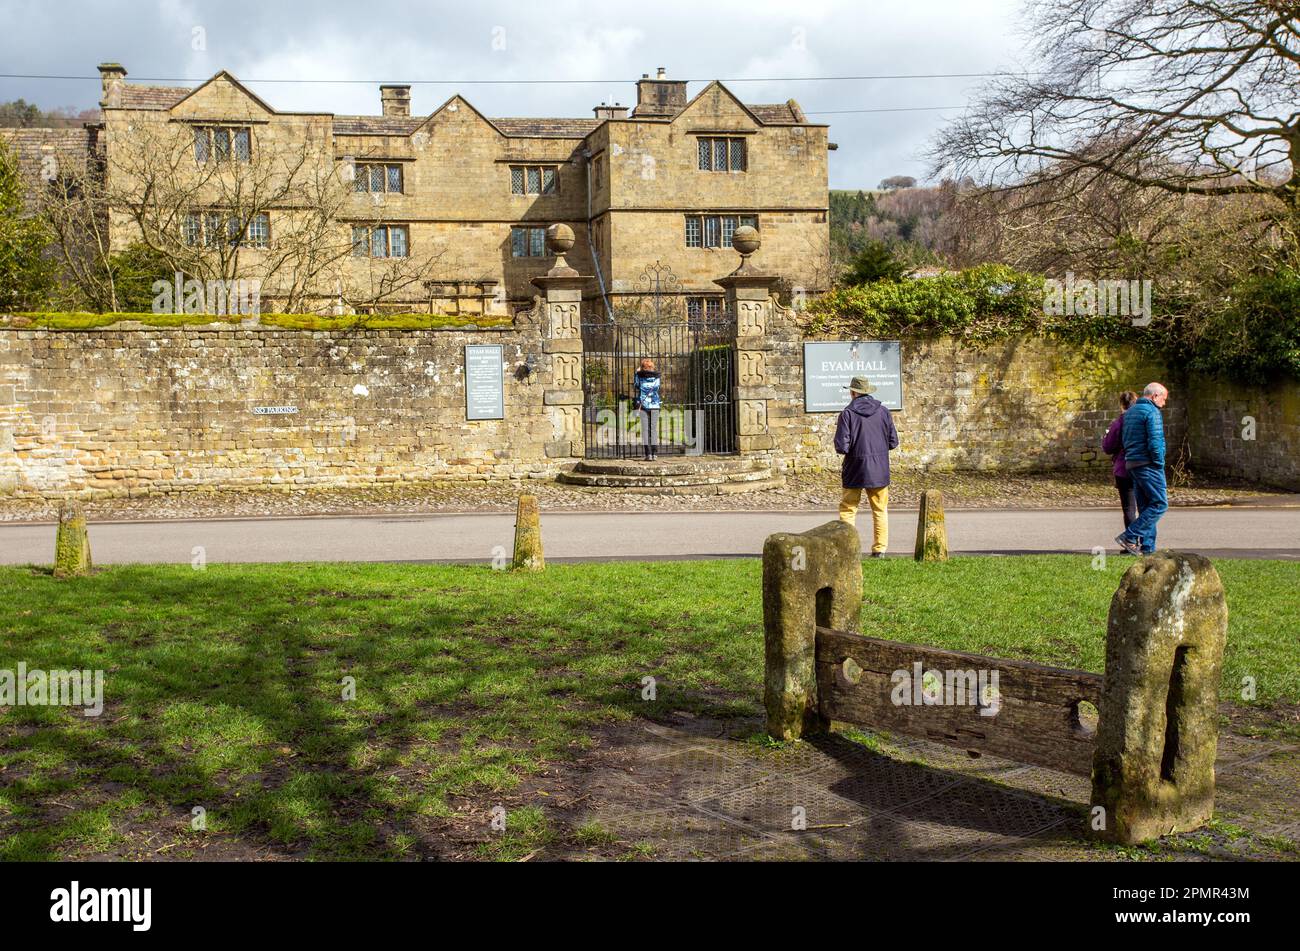 Eyam Hall, a Jacobean style manor house in the Derbyshire Peak District plague village of Eyam England seen from the stocks on the village green Stock Photo